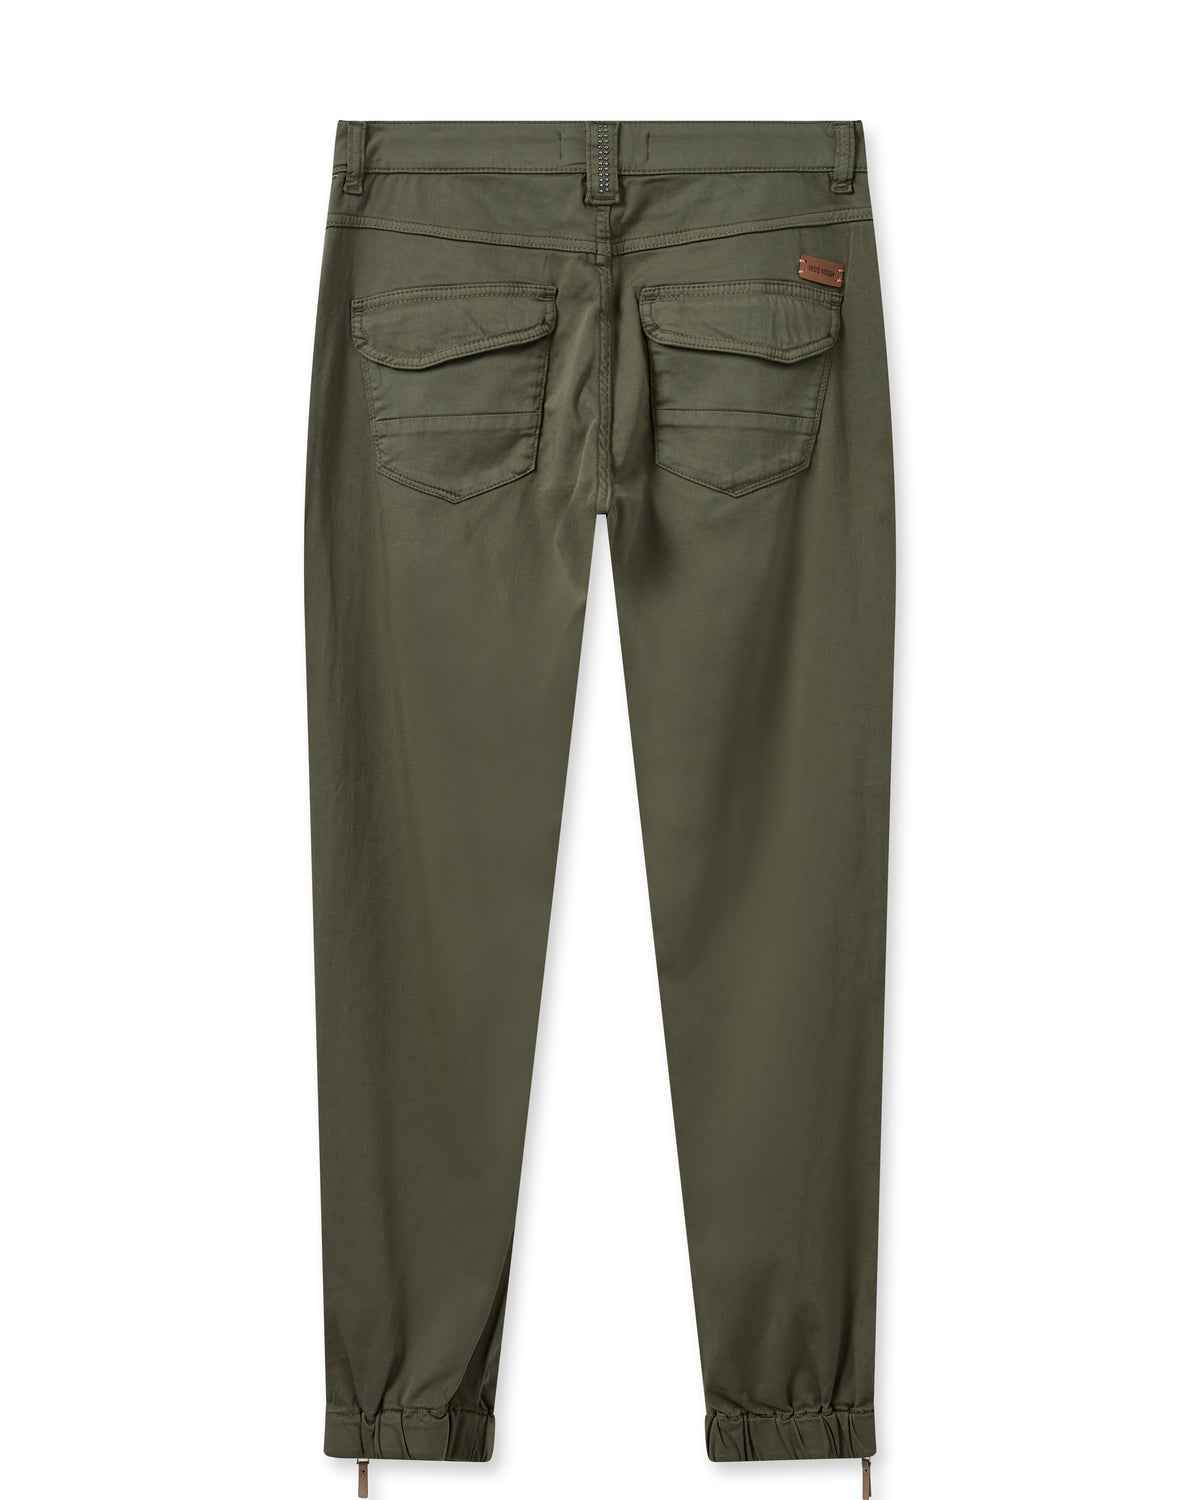 Khaki jogger style cargo trousers with elasticated ankles and zip fastenings